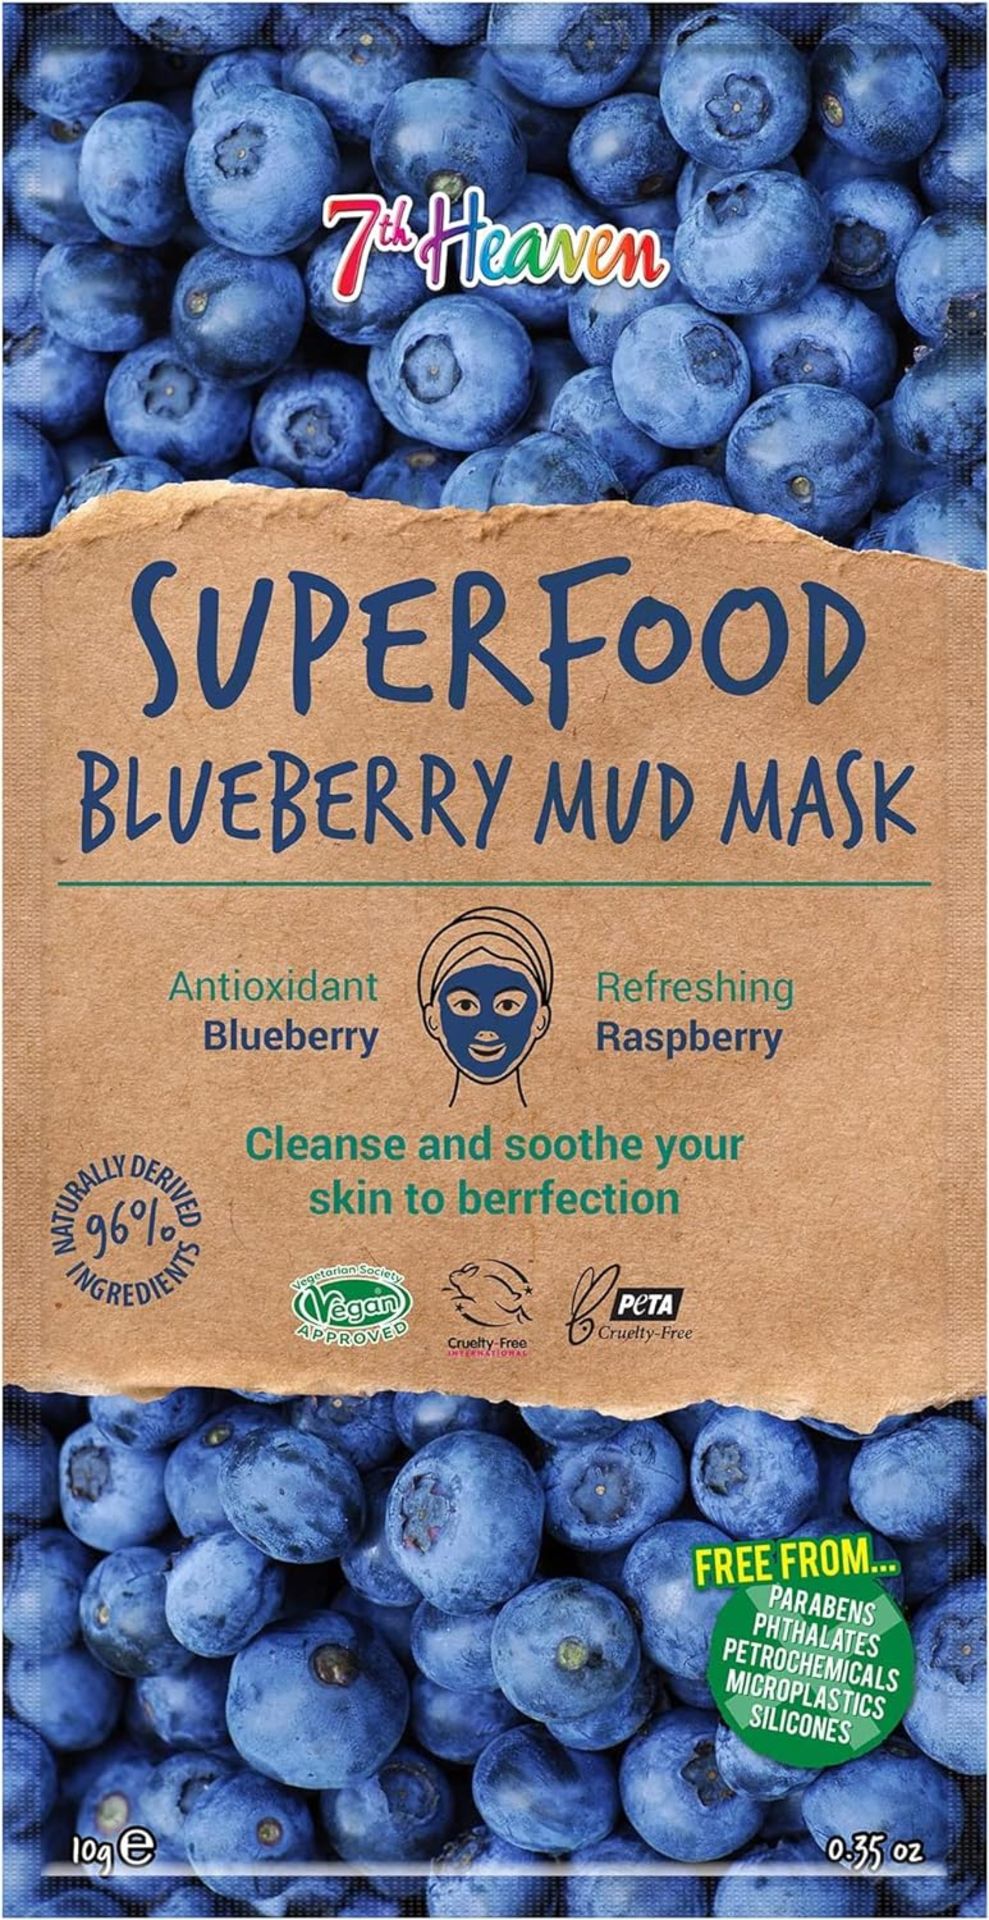 184 X BRAND NEW 7TH HEAVEN SUPERFOOD BLUEBERRY MUD MASKS 10ML PW